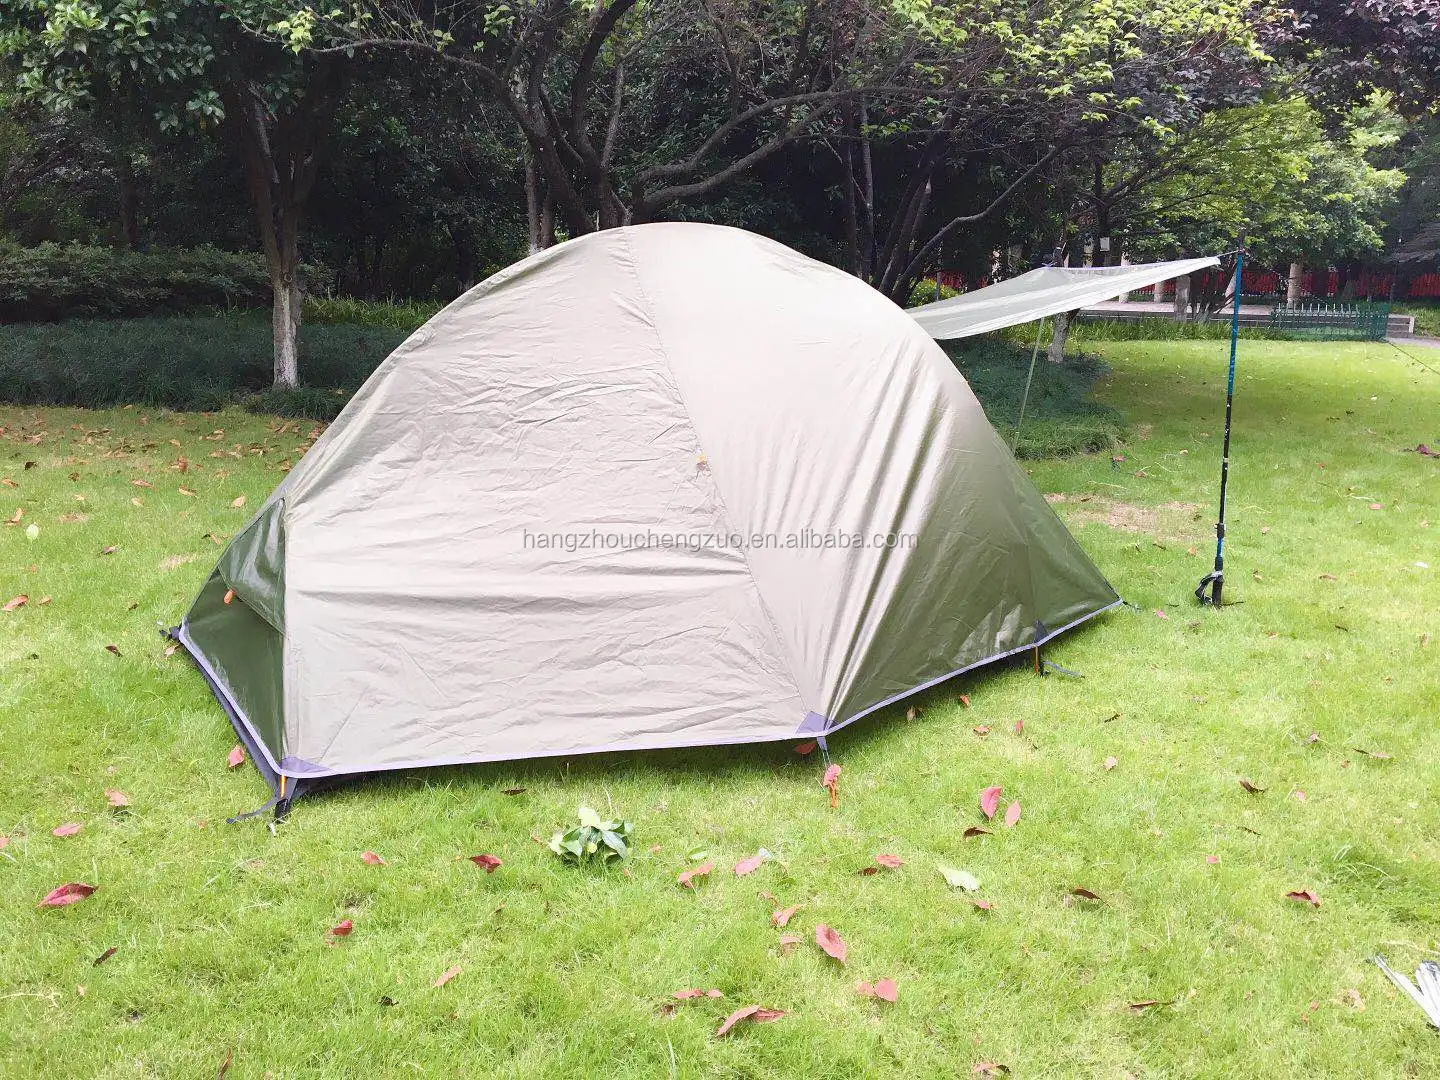 Nemo 2P TENT HDS Army Green CZX-298 Nemo Hornet Ultralight Backpacking Nemo 2 Person Lingweight customize camping 